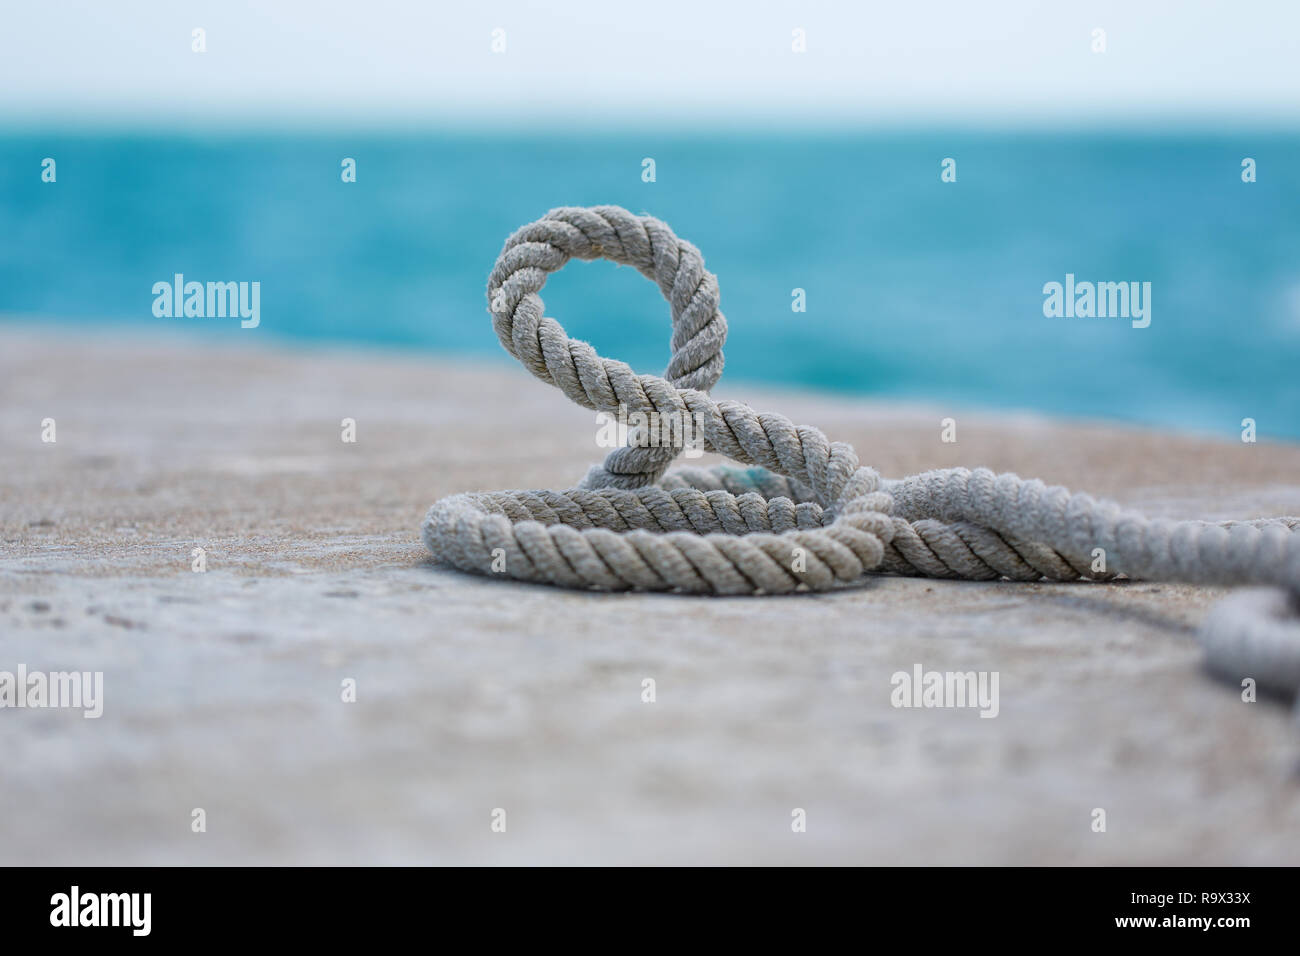 Seaman's rope. Wrapped on the ground. Stock Photo